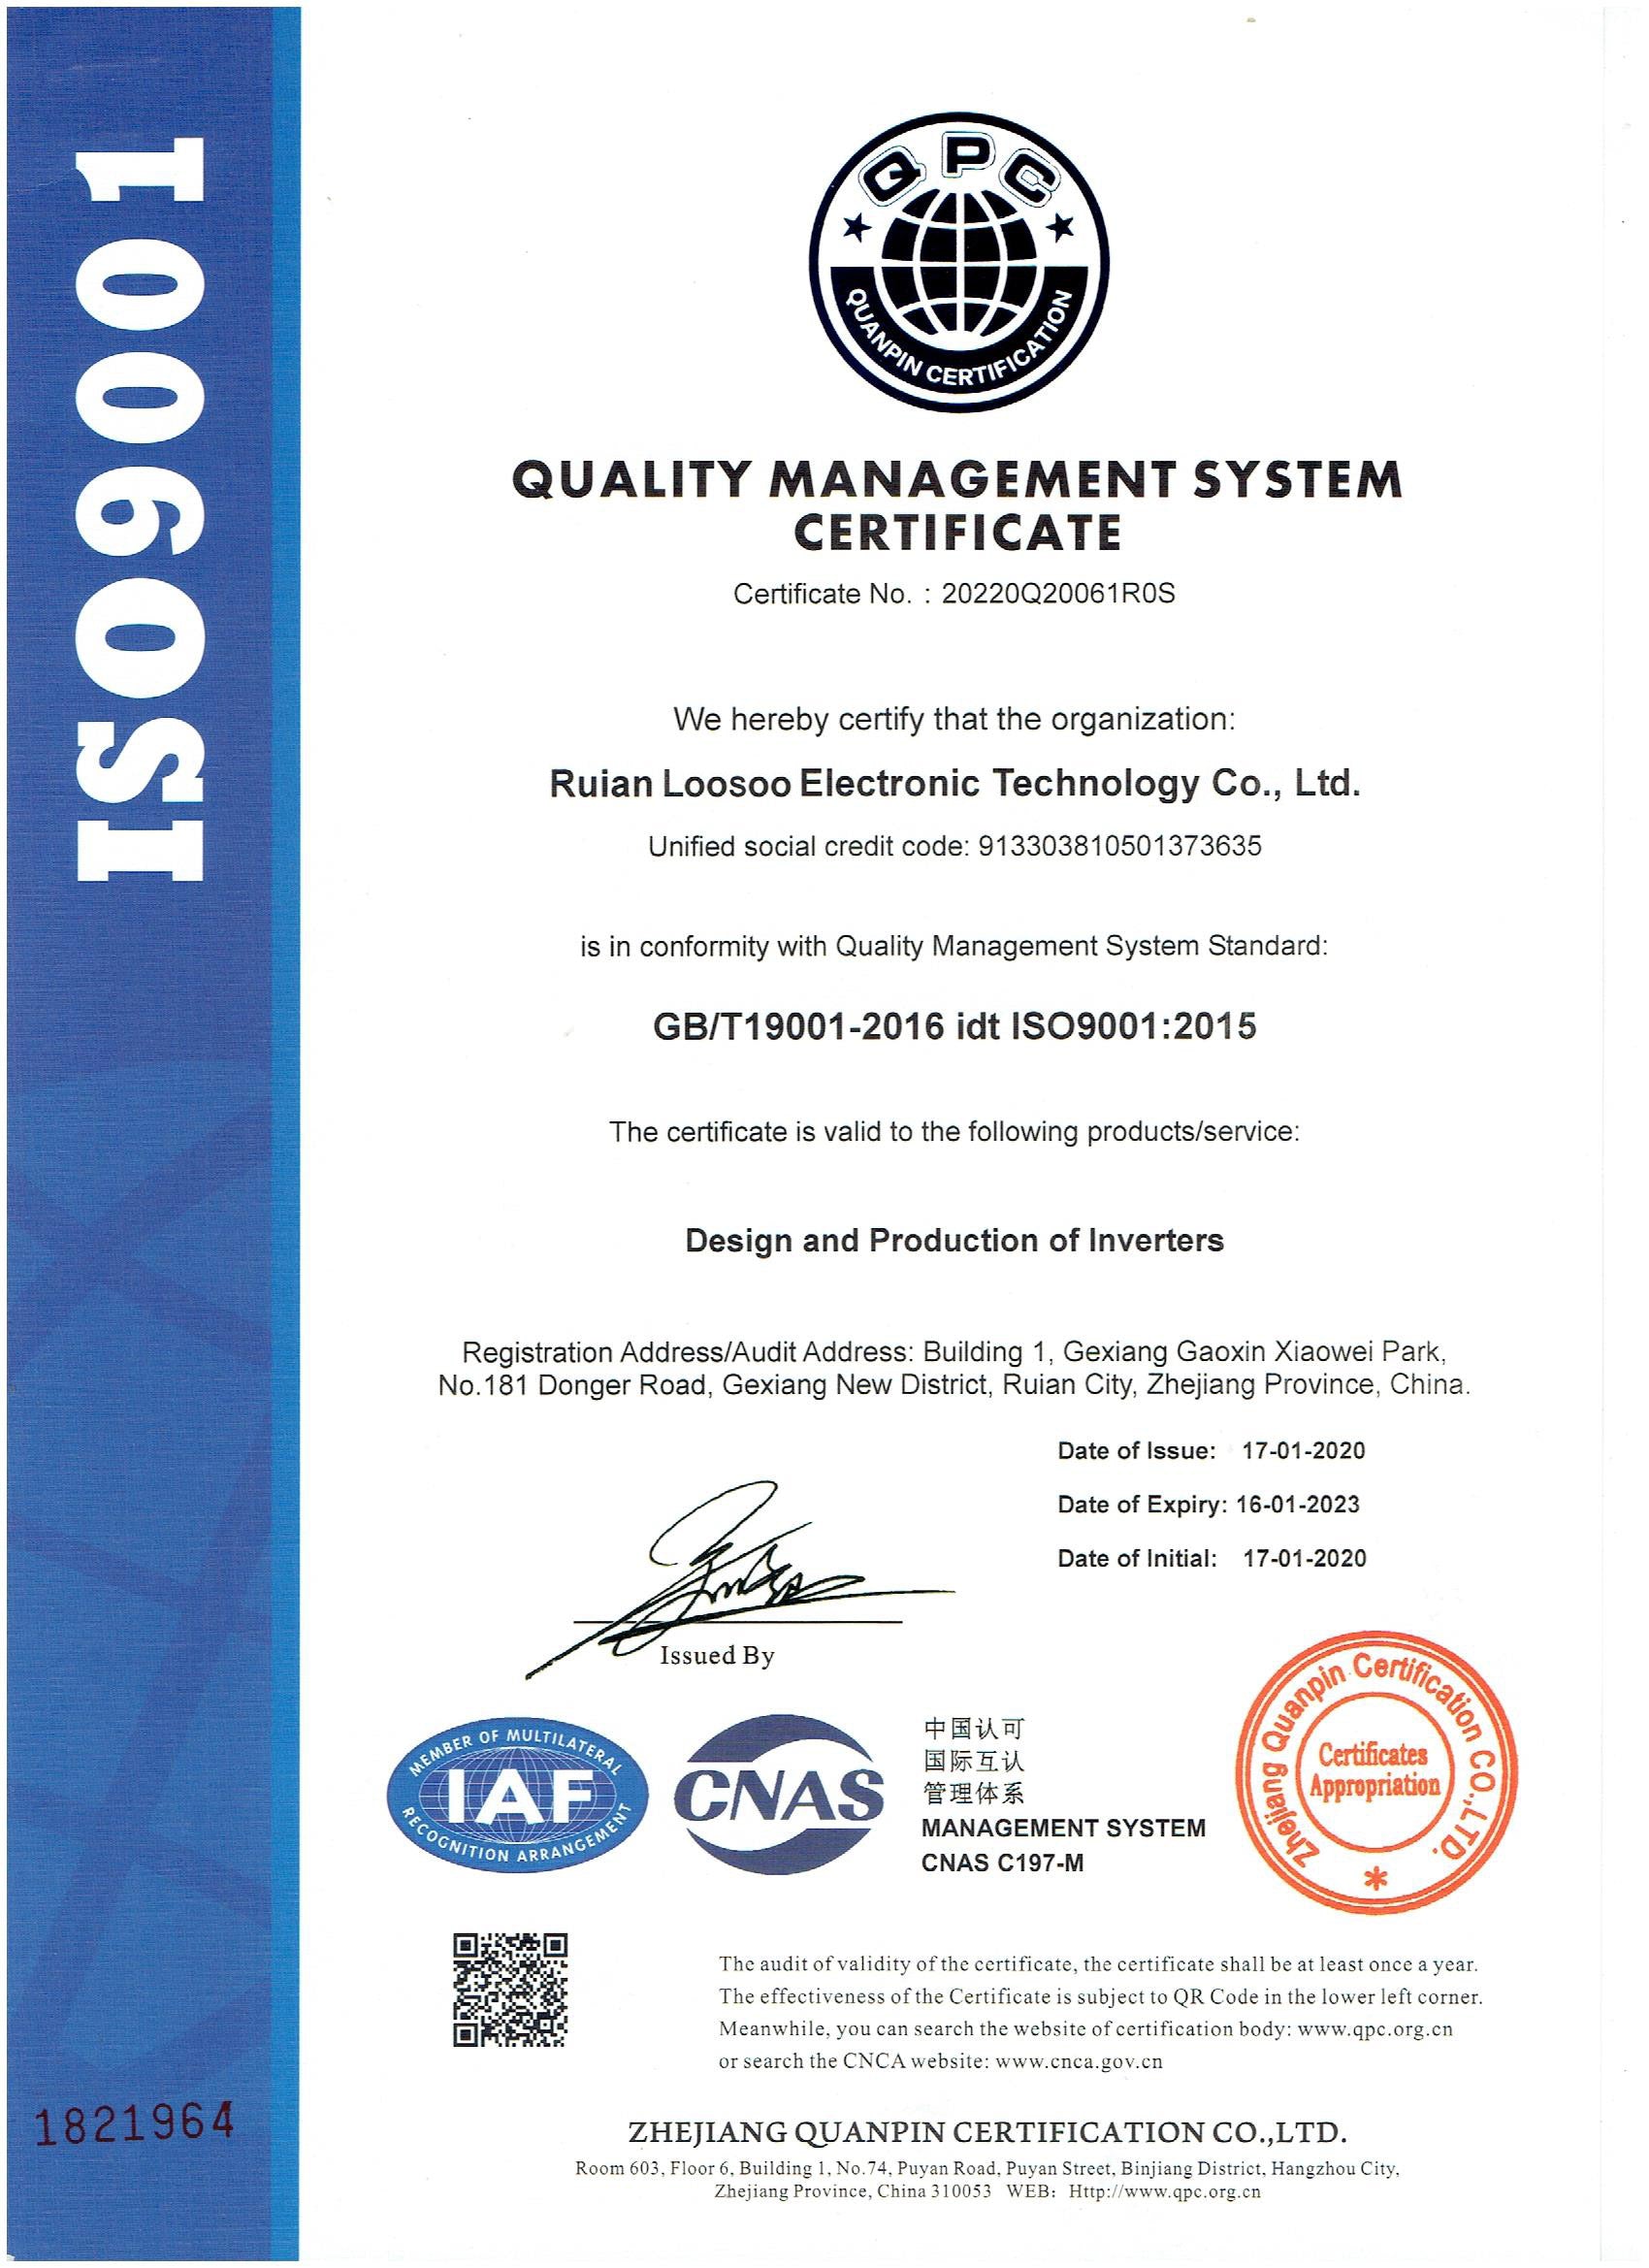 Certifications We apply the IATF16949 and ISO9001 management systems in our production process, and the products have passed a number of international certifications, such as CE, GS, EPA, OECD, and other certifications.